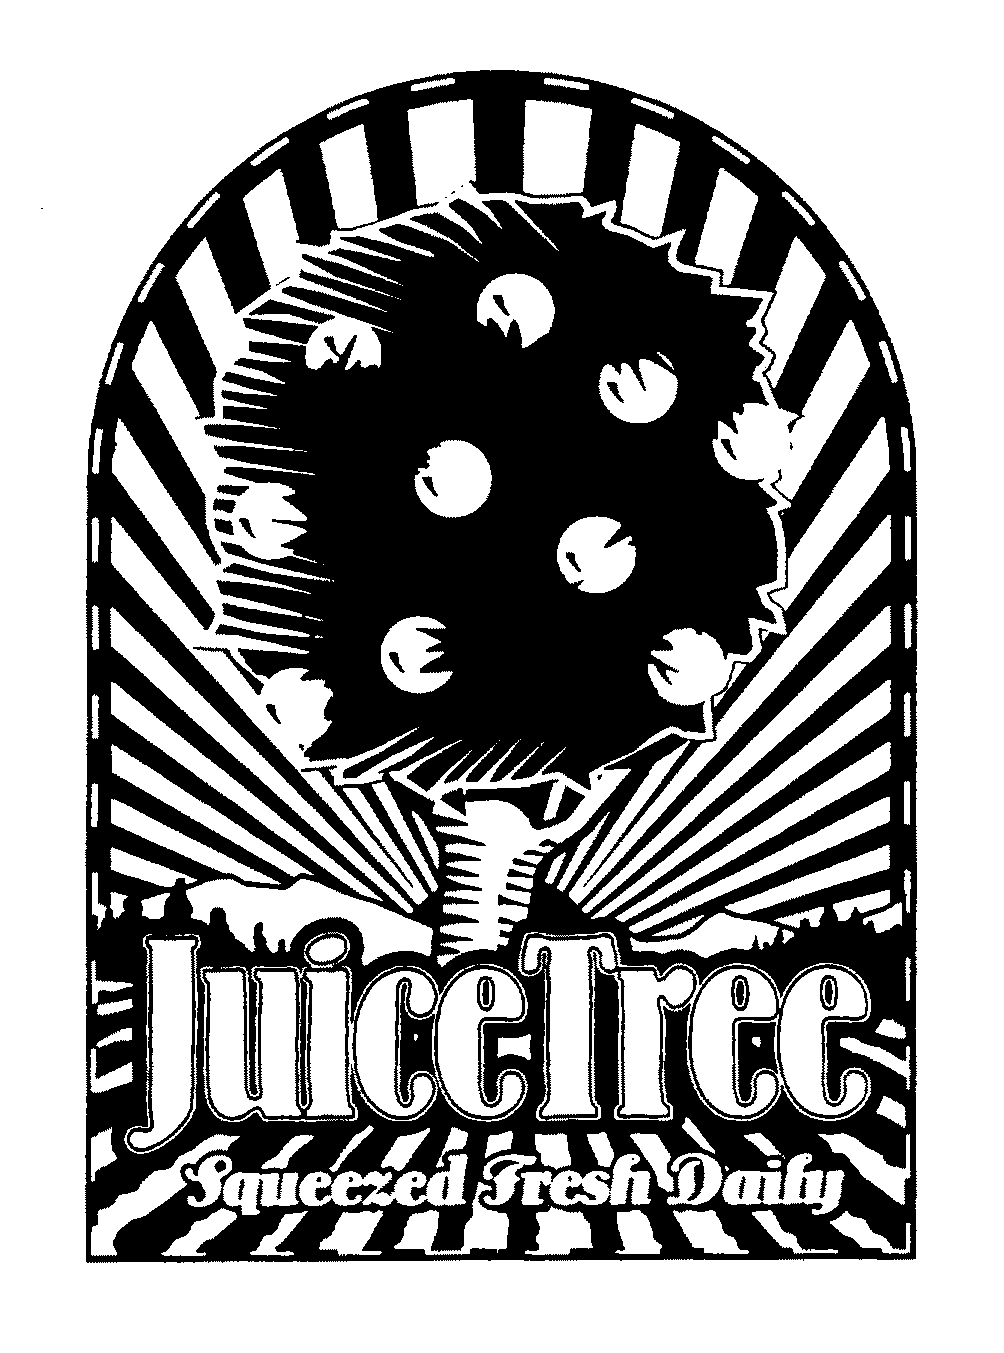  JUICE-TREE SQUEEZED FRESH DAILY